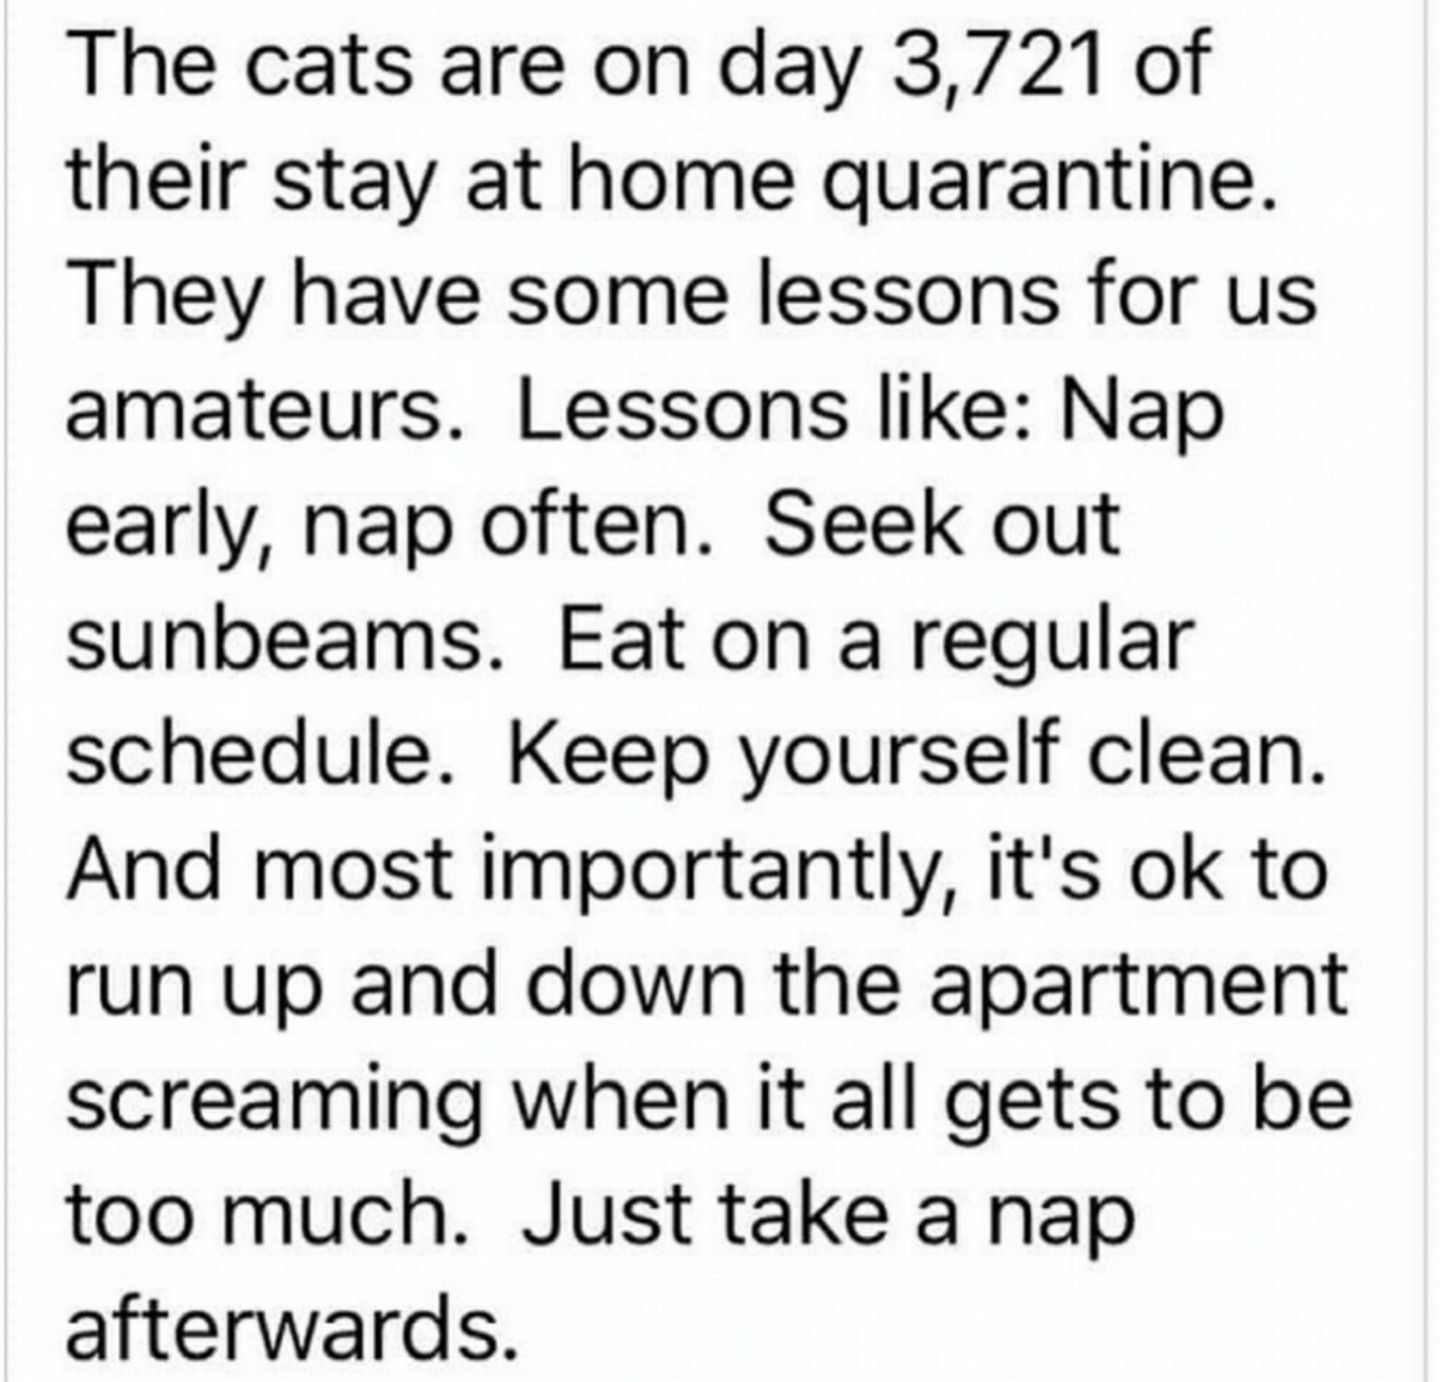 We can all learn from cats.